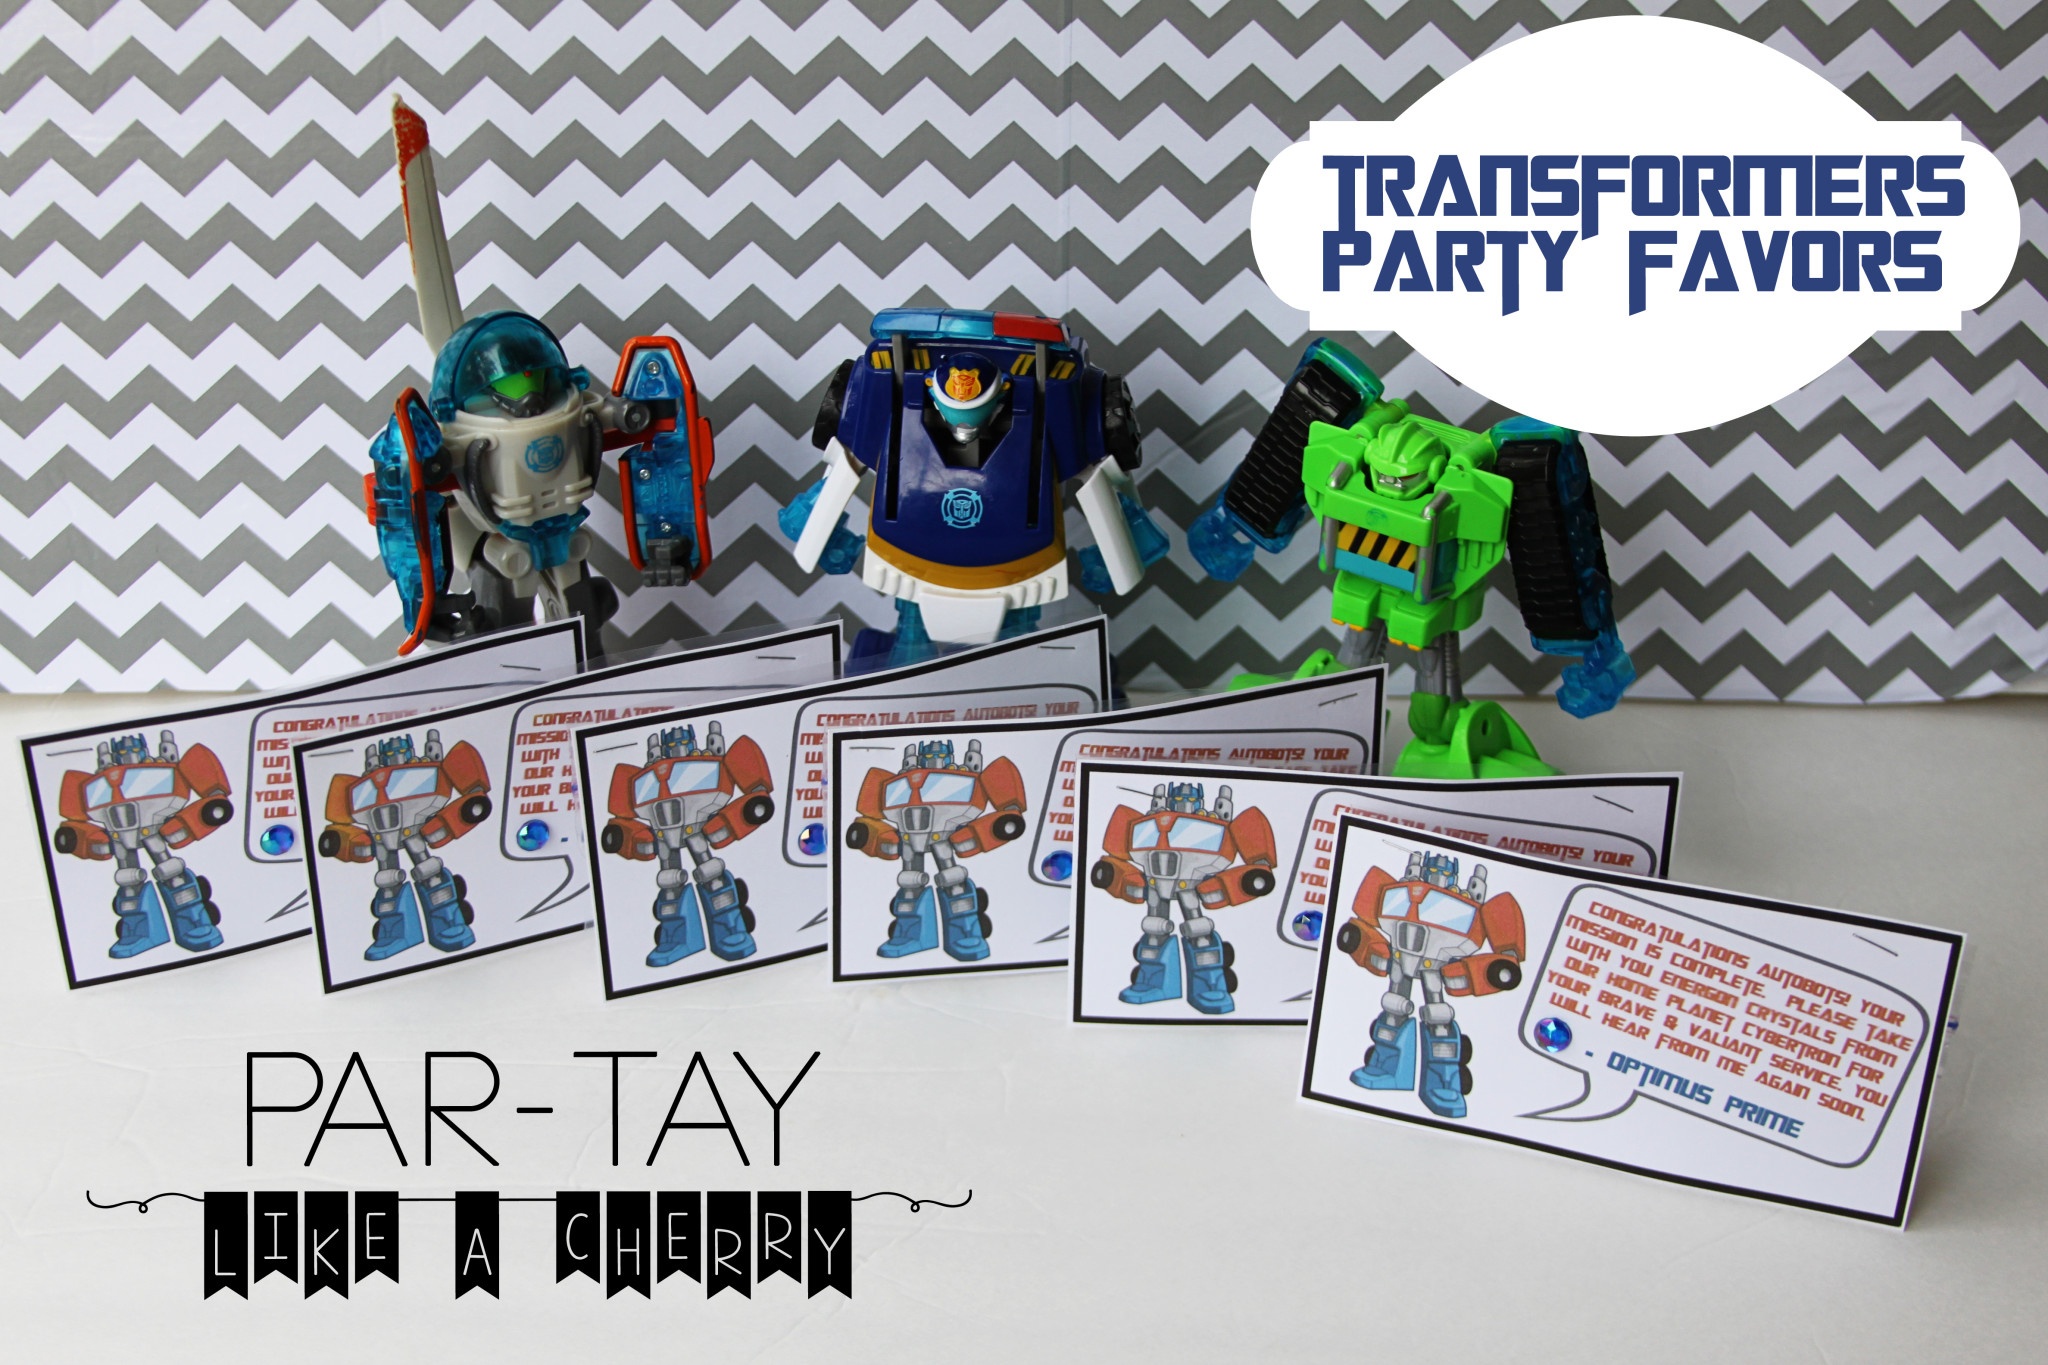 Transformer Party Favors - Party Like A Cherry - Transformers Party Invitations Free Printable